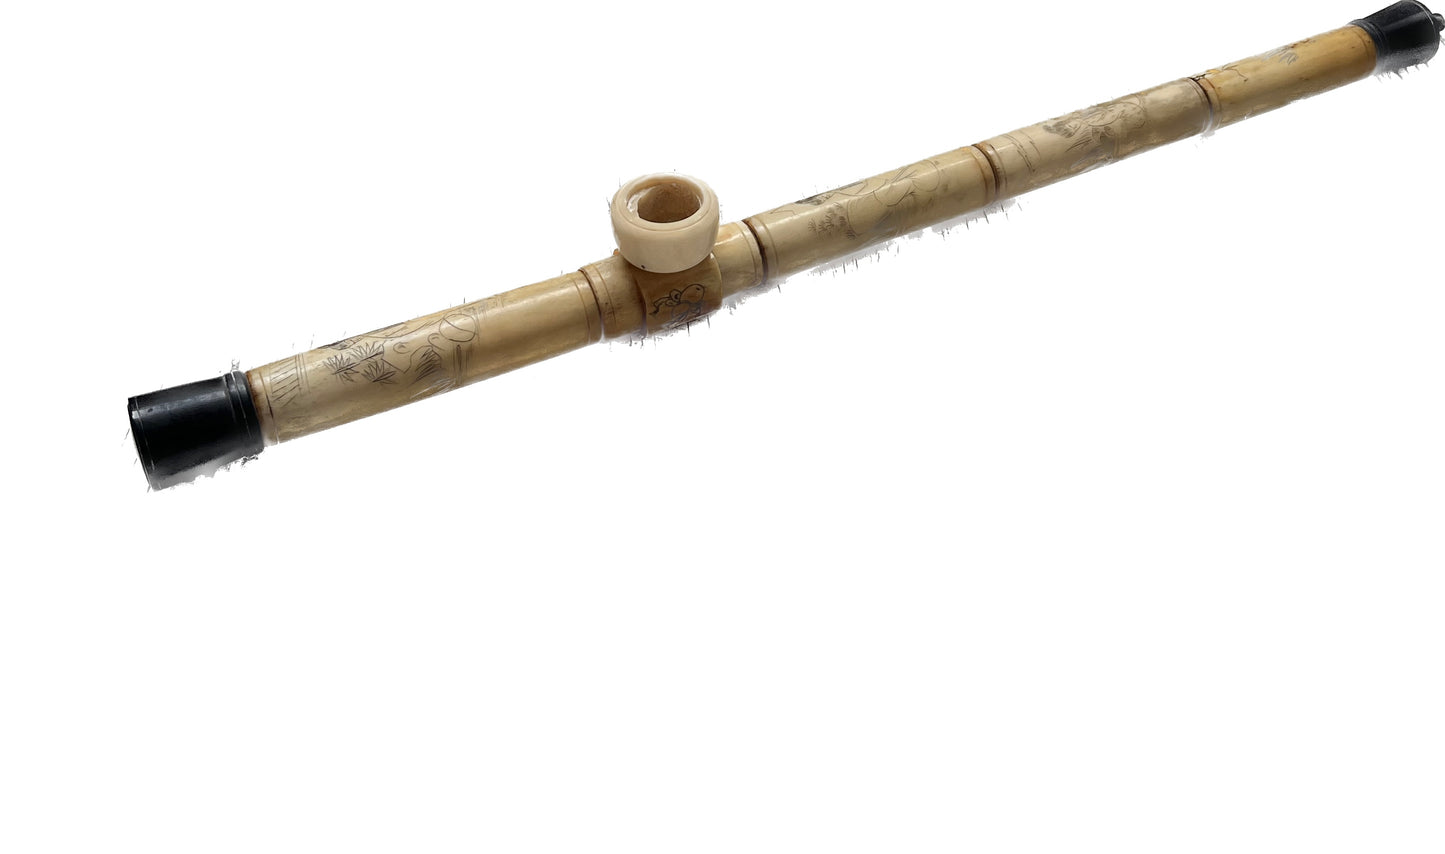 Late Qing, likely late 19th to early 20th century bone handled opium pipe